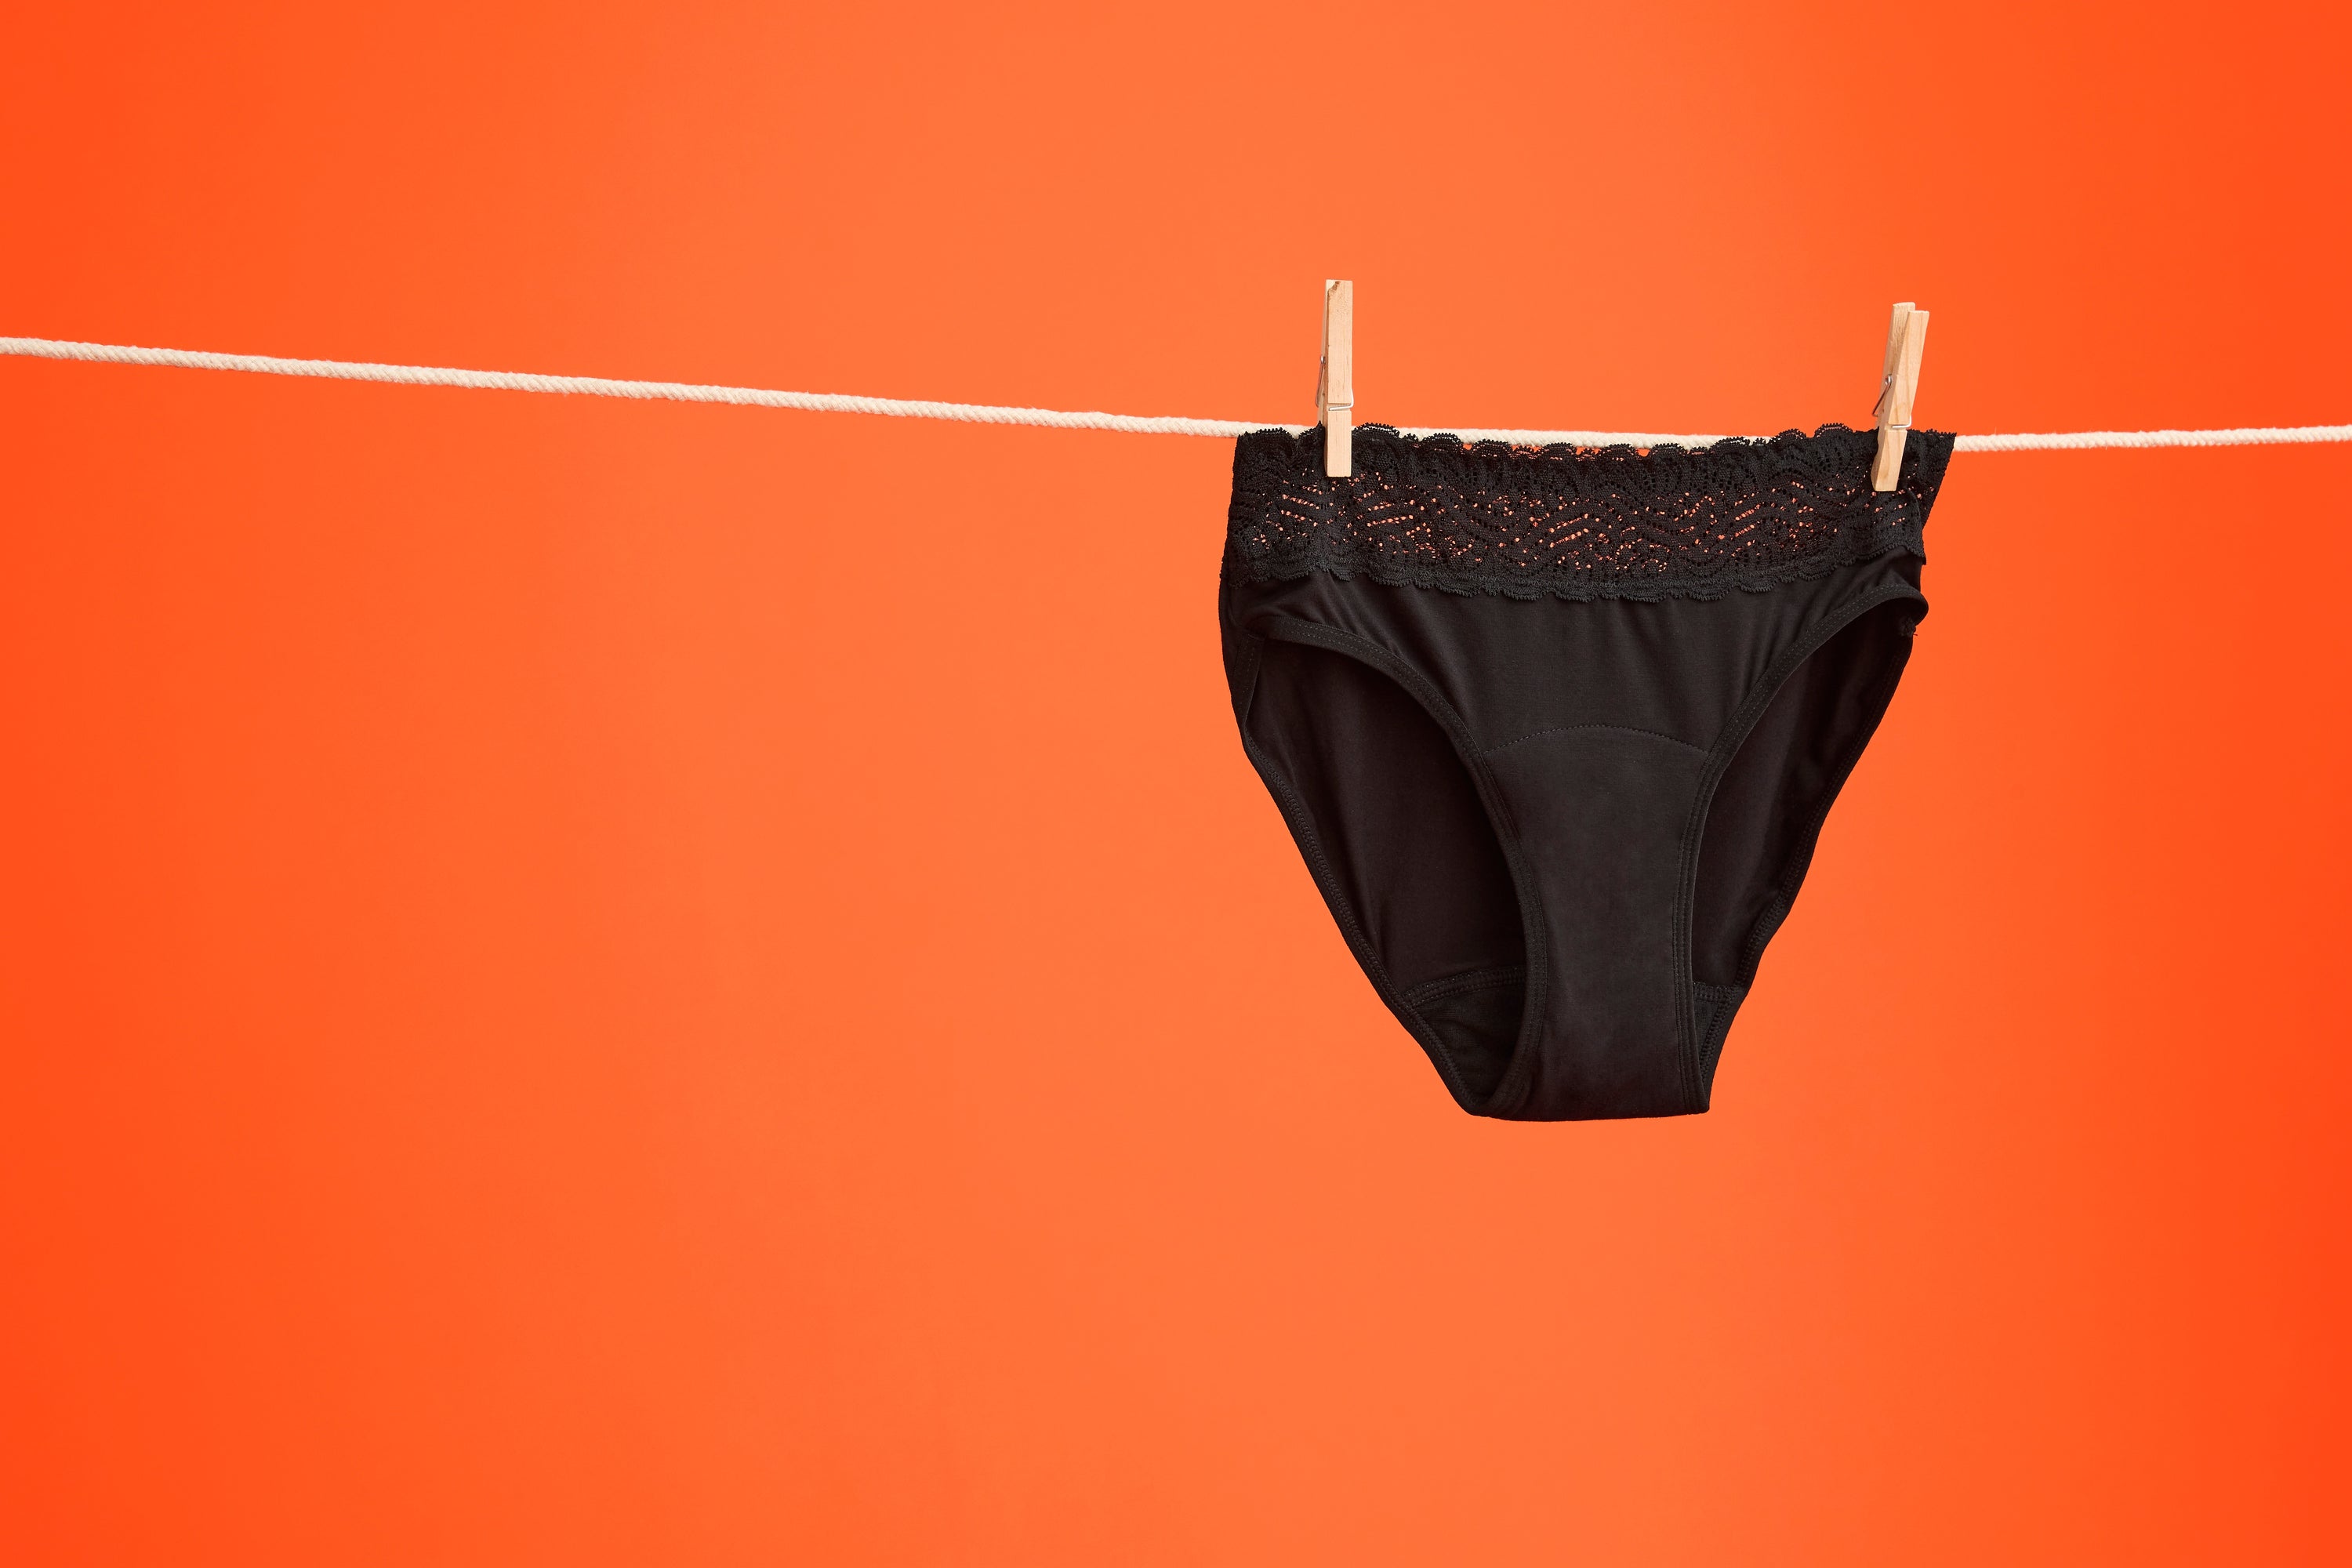 Modibodi on X: Modibodi is for every body, which is why we're SO proud for  you to meet our All-Gender Collection of period underwear. Made to be worn  and loved by all